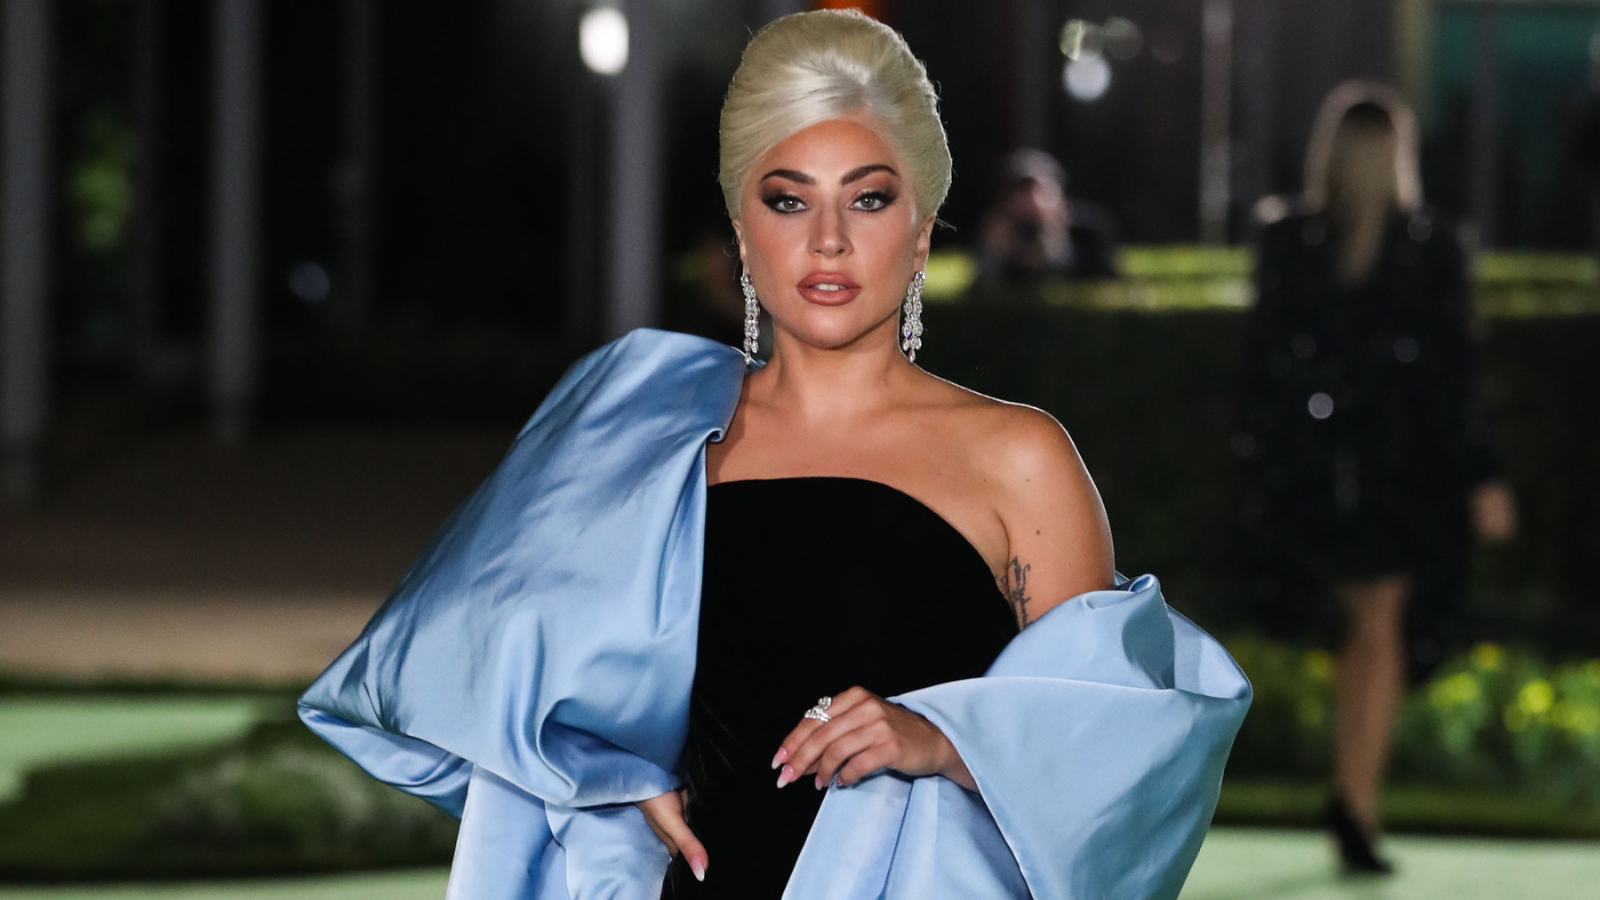 A picture of Lady Gaga in a black dress with a light blue jacket.